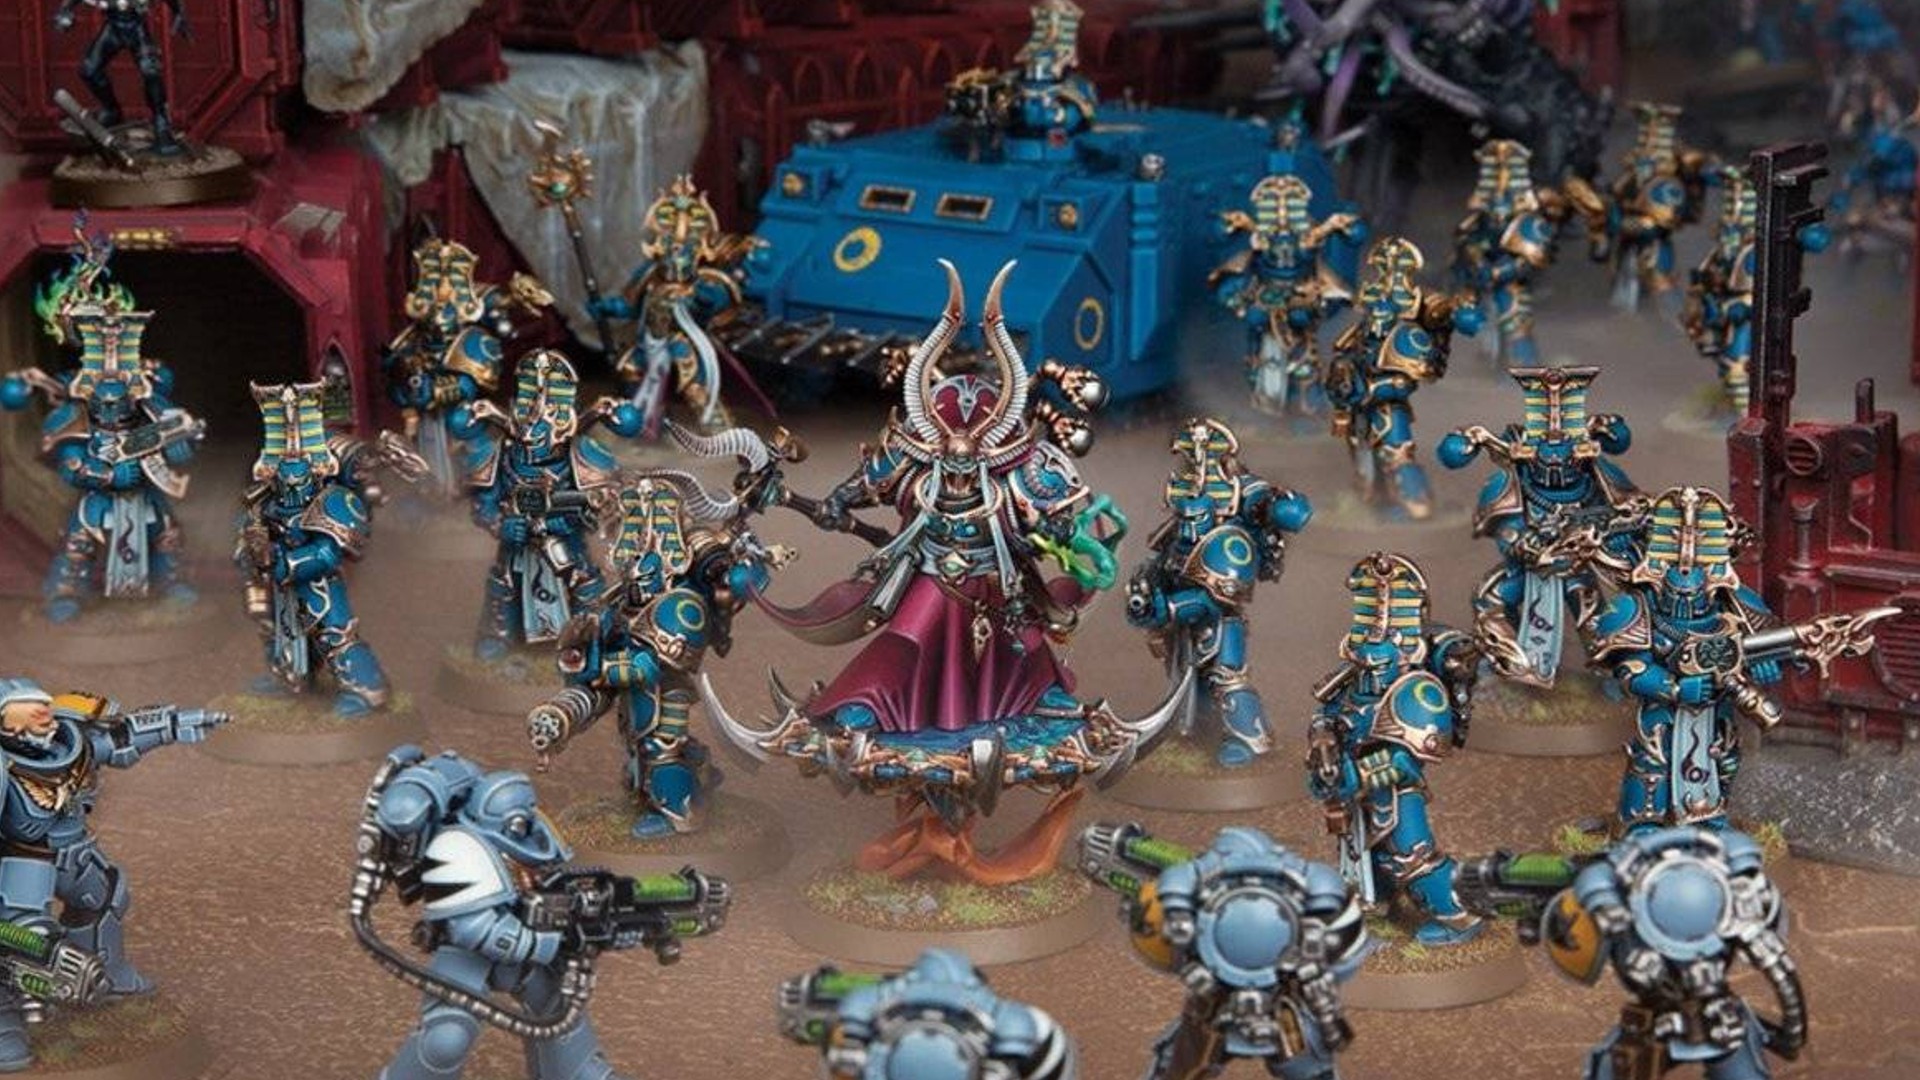 How to Play Thousand Sons in Warhammer 40k 10th Edition 